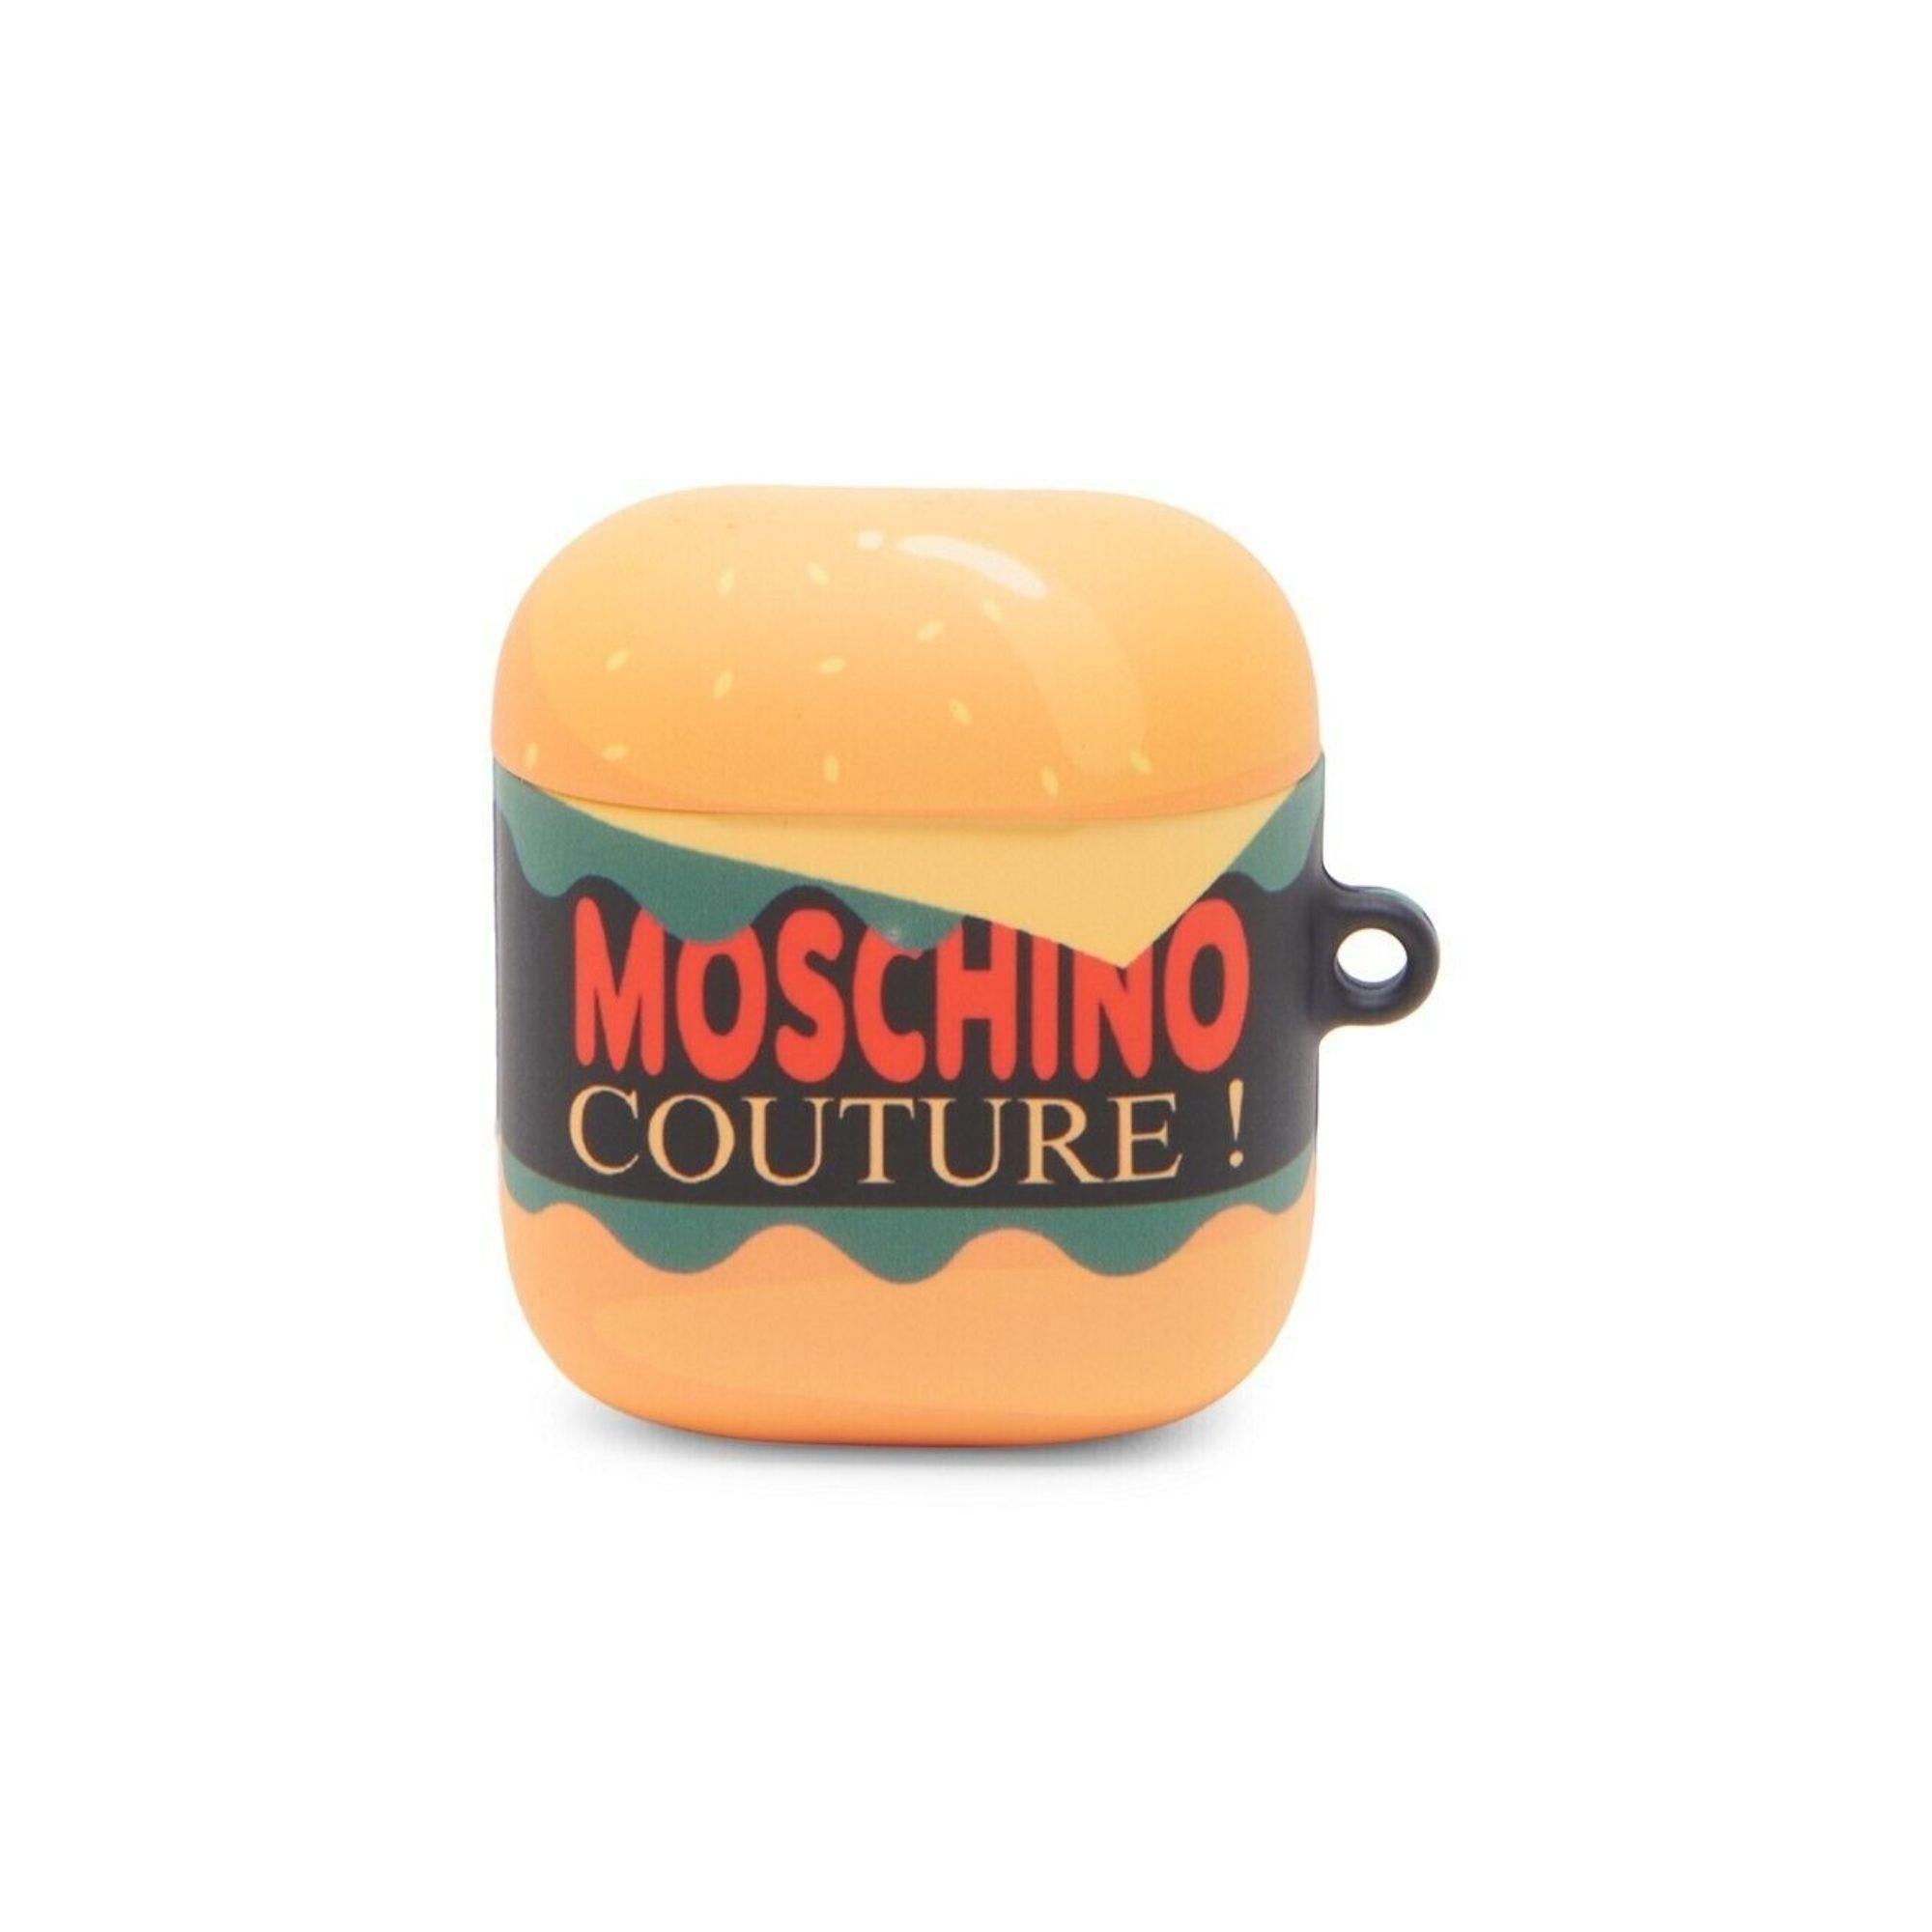 SS22 Moschino Couture Jeremy Scott Logo Burger Diner Print Airpods Case

Additional Information:
Material: 100% Polycarbonate
Color: Multi-color
Size: One Size
Pattern: Burger
Condition: Brand new in the box